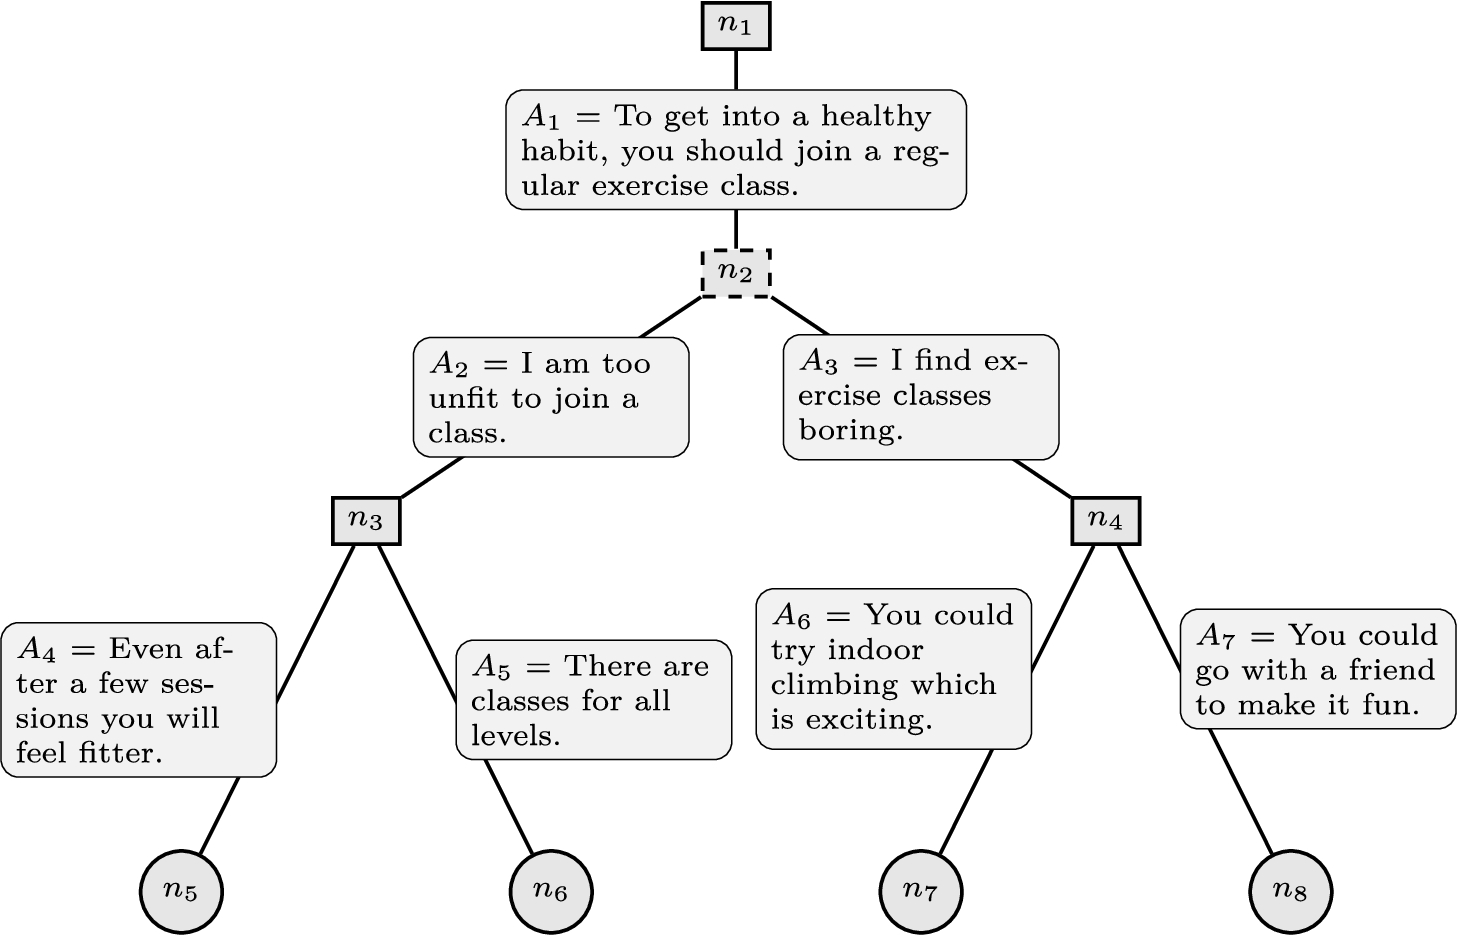 A decision tree for an argumentation dialogue. Each arc is labelled with a posit move in a dialogue, which for readability purposes is assumed to consist of only single arguments in this example. Each branch denotes a dialogue involving exactly three arguments with the first (respectively the second) being posited by the proponent (respectively the opponent). The proponent (decision) nodes are solid boxes, the opponent (chance) nodes are dashed boxes and the leaf nodes are circles.